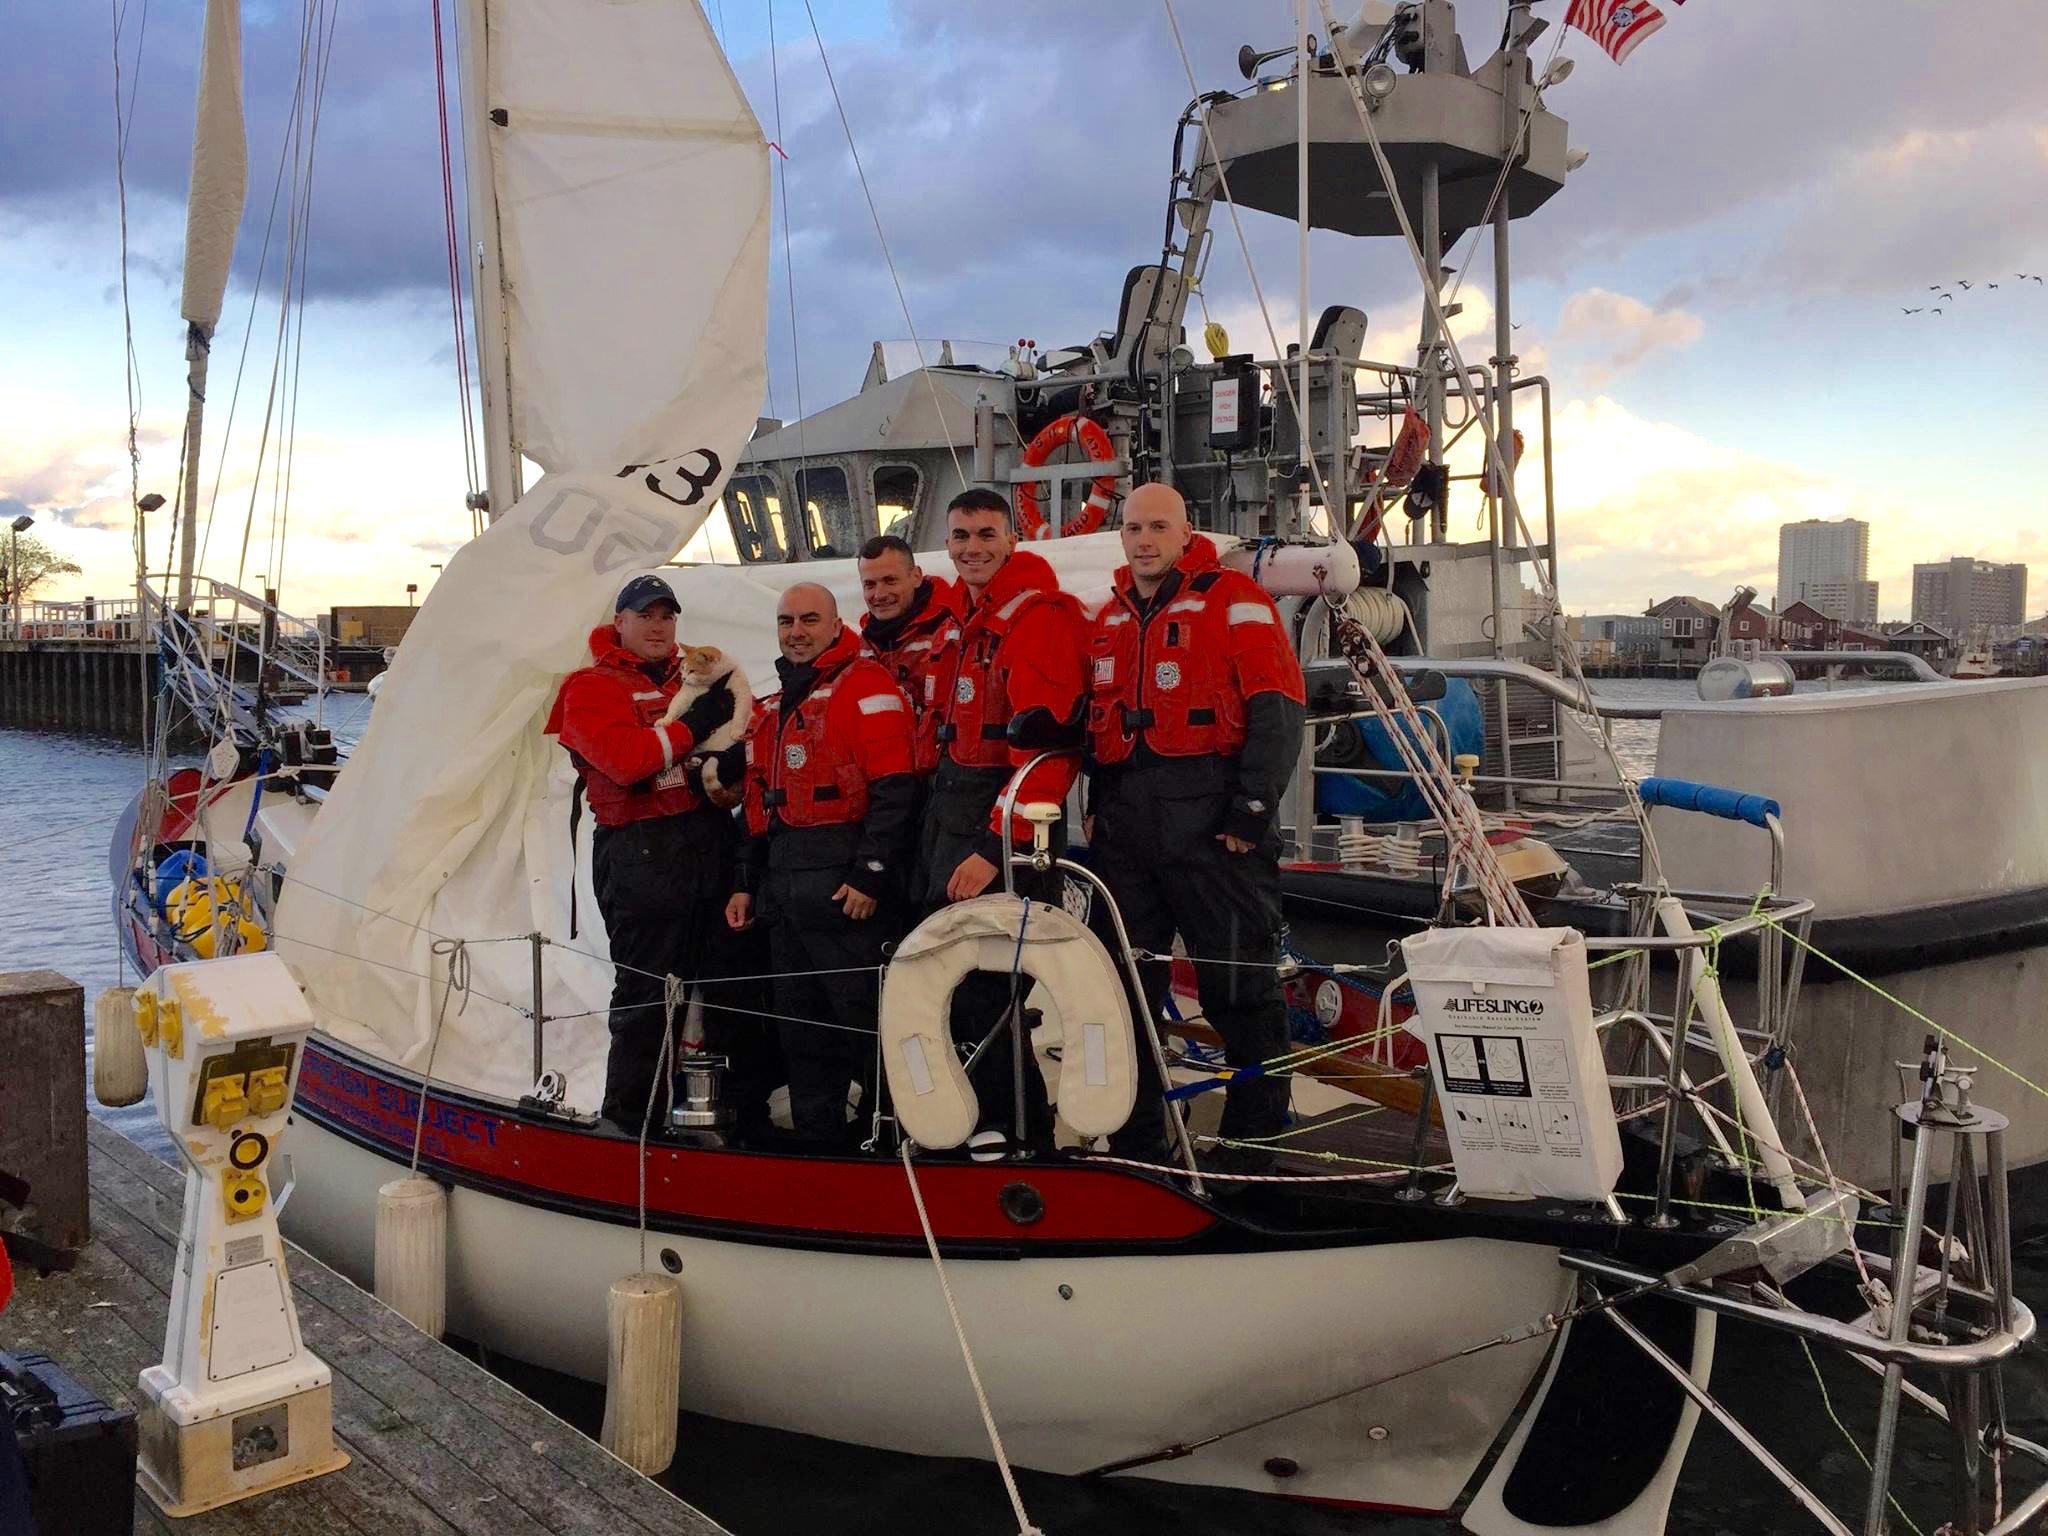  A Coast Guard rescue crew poses on a sailboat that was towed ashore along with its resident cat. (Image courtesy of the U.S. Coast Guard) 